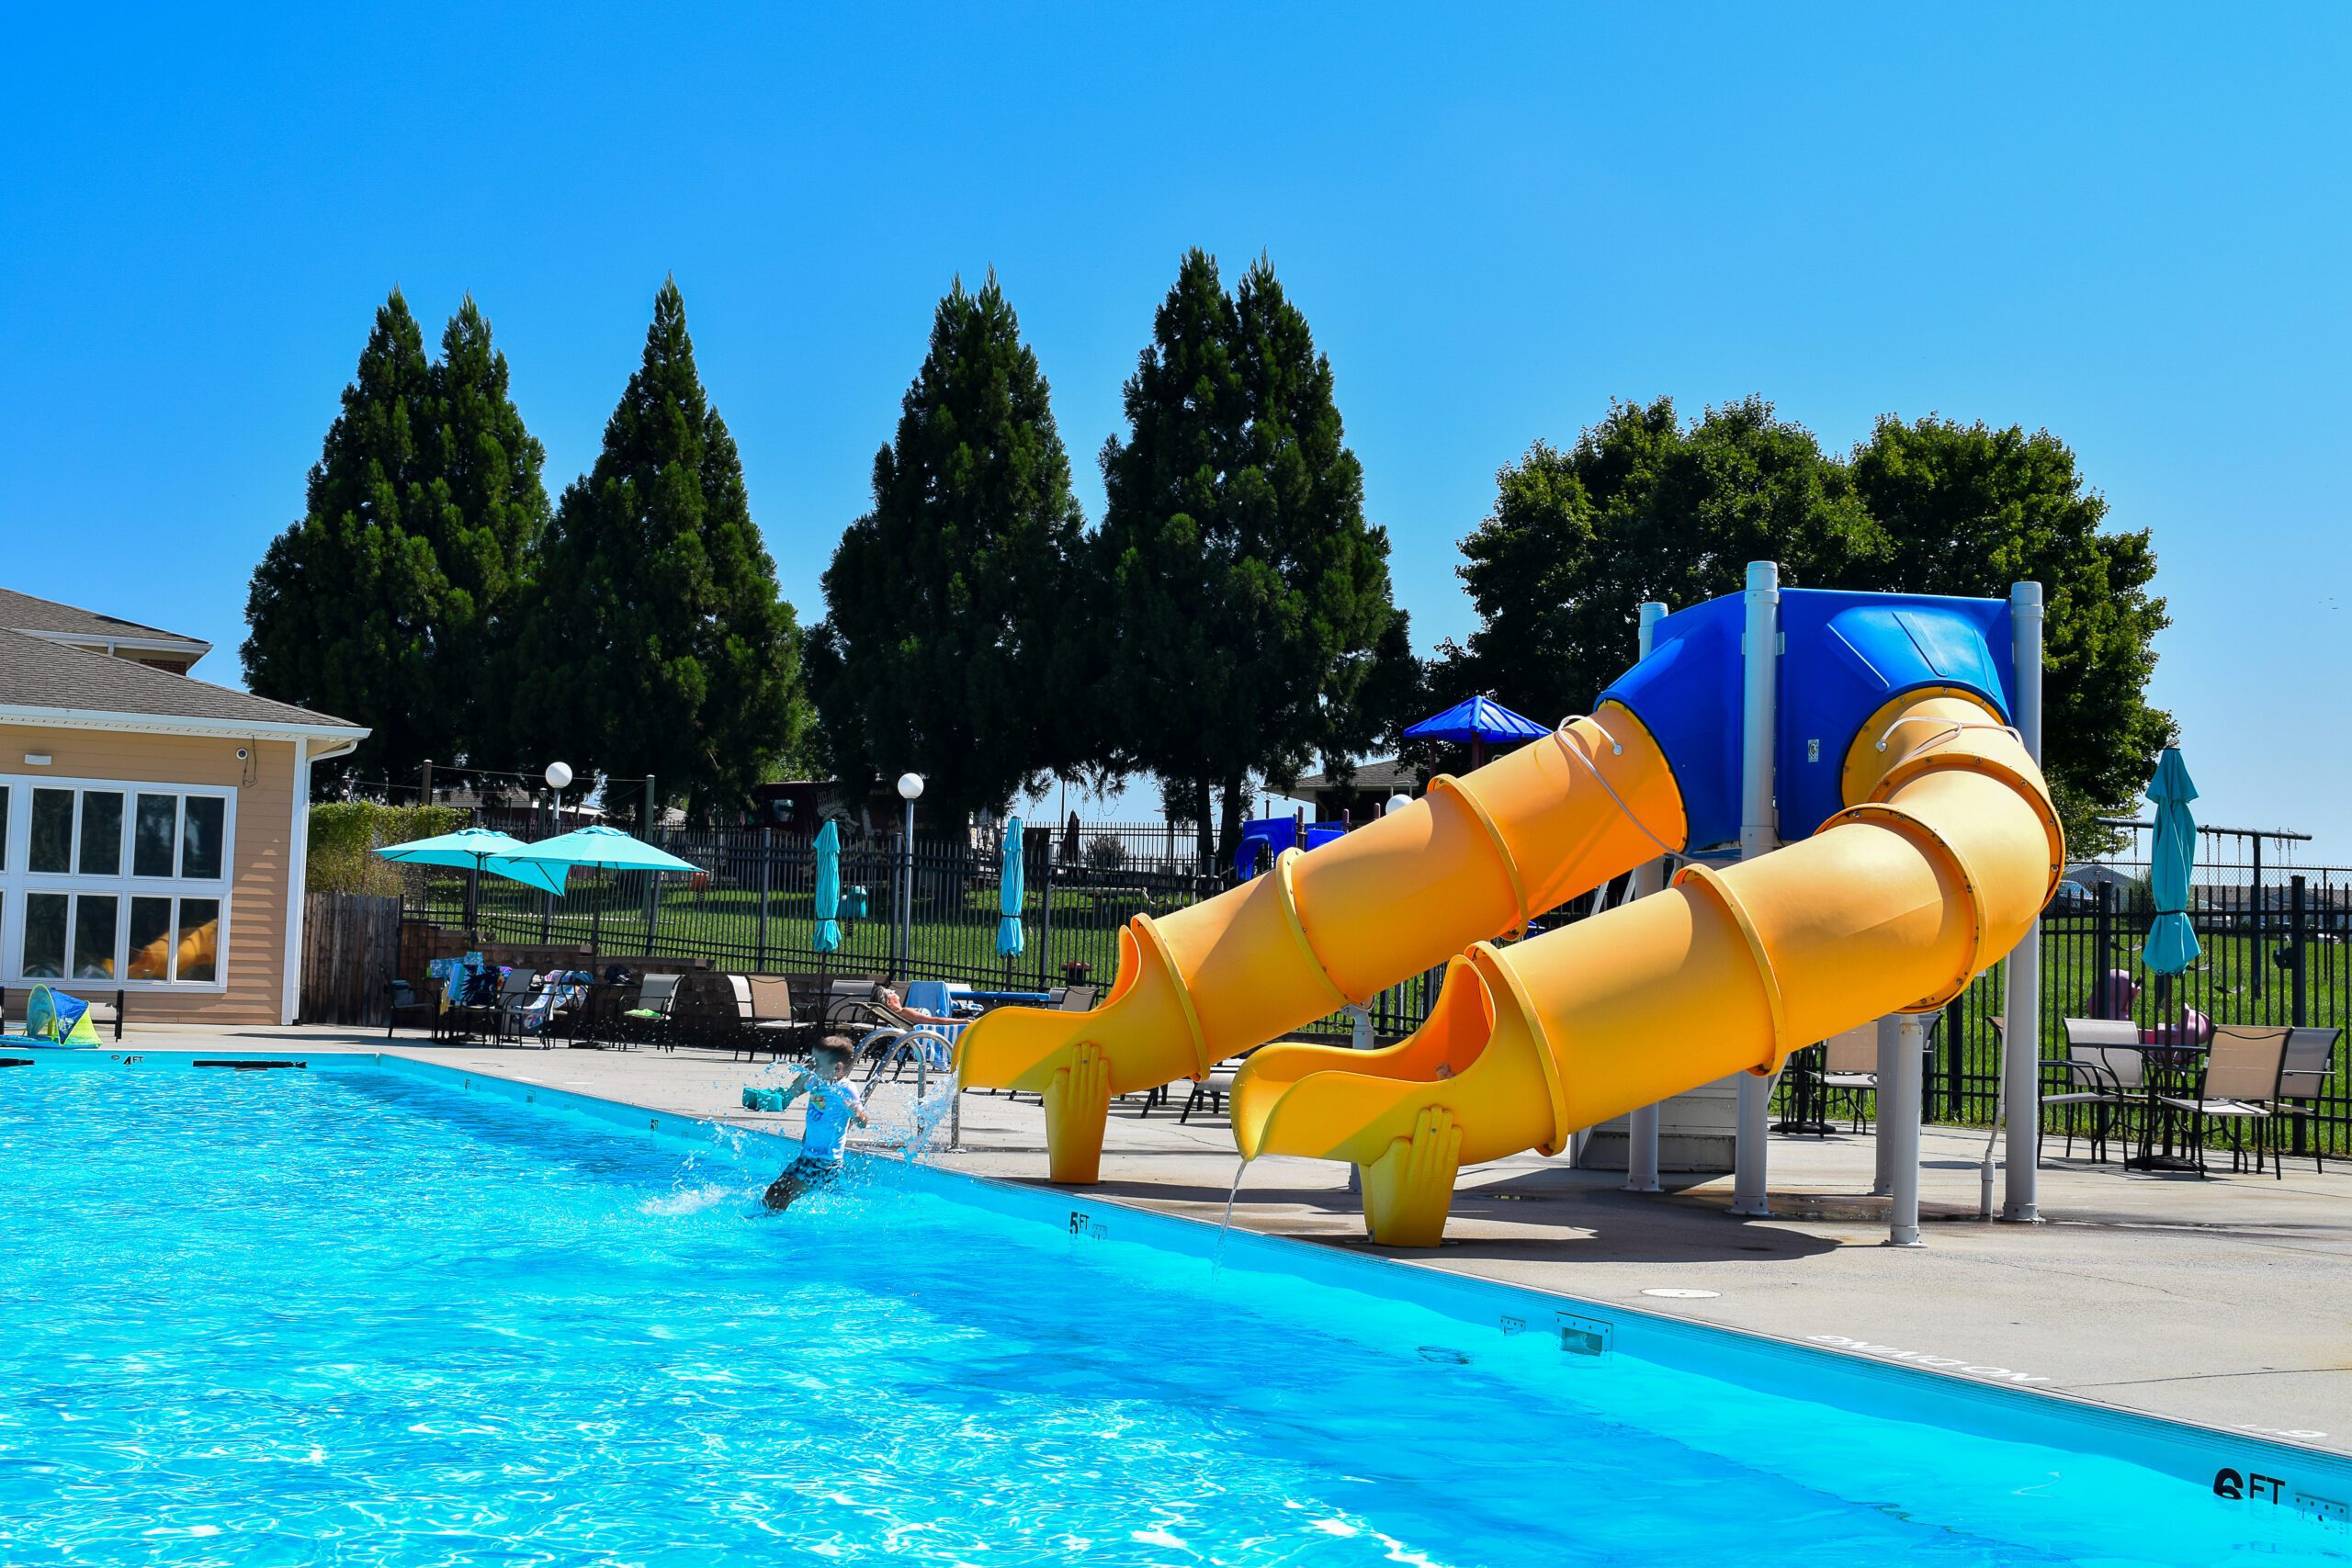 Child playing on the water slide at The Centre Outdoor Pool.